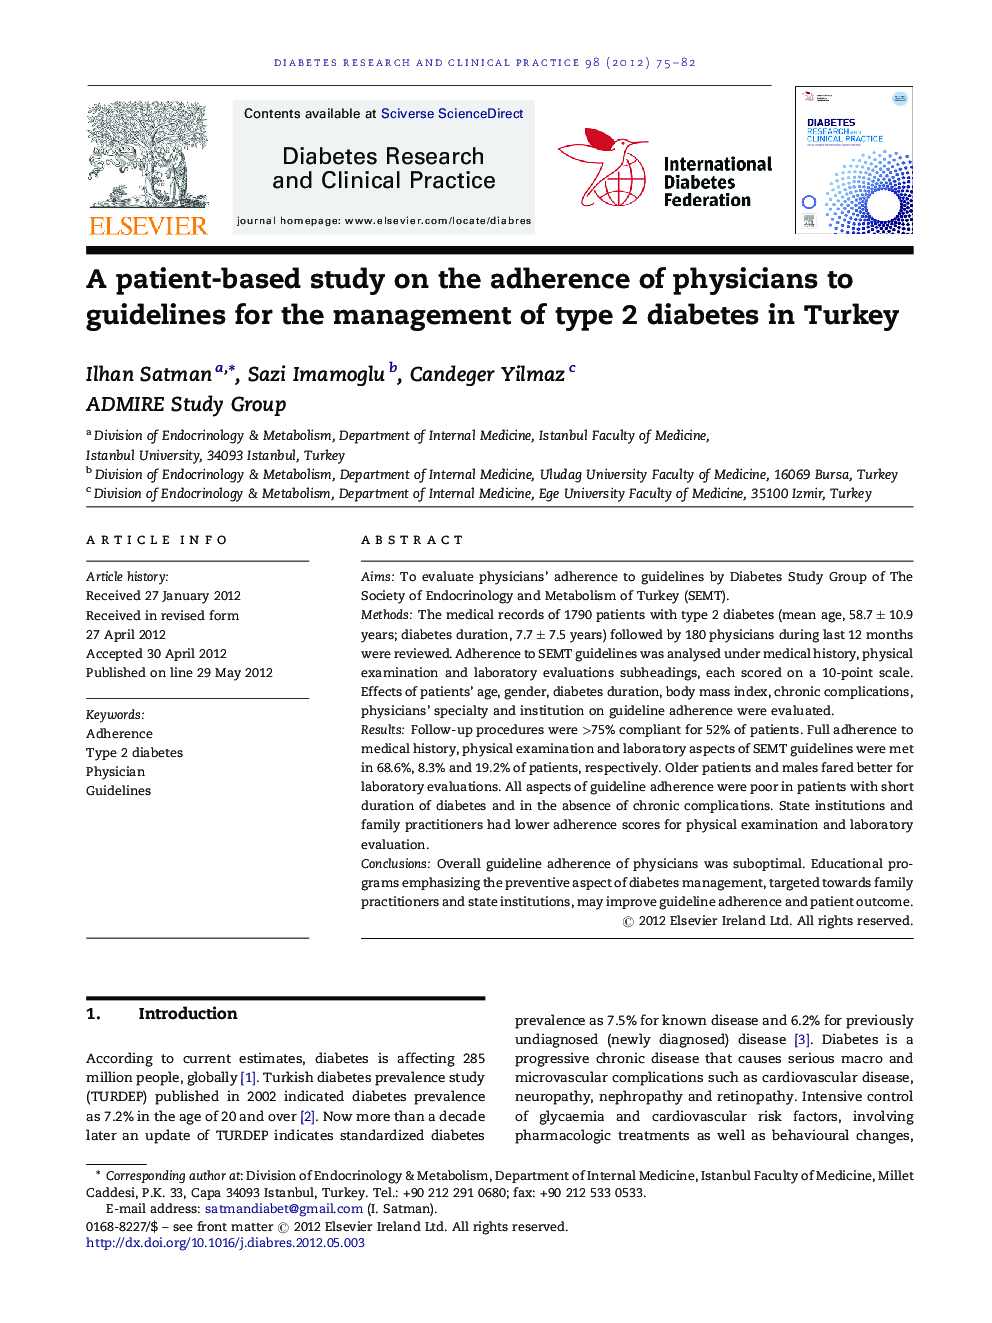 A patient-based study on the adherence of physicians to guidelines for the management of type 2 diabetes in Turkey